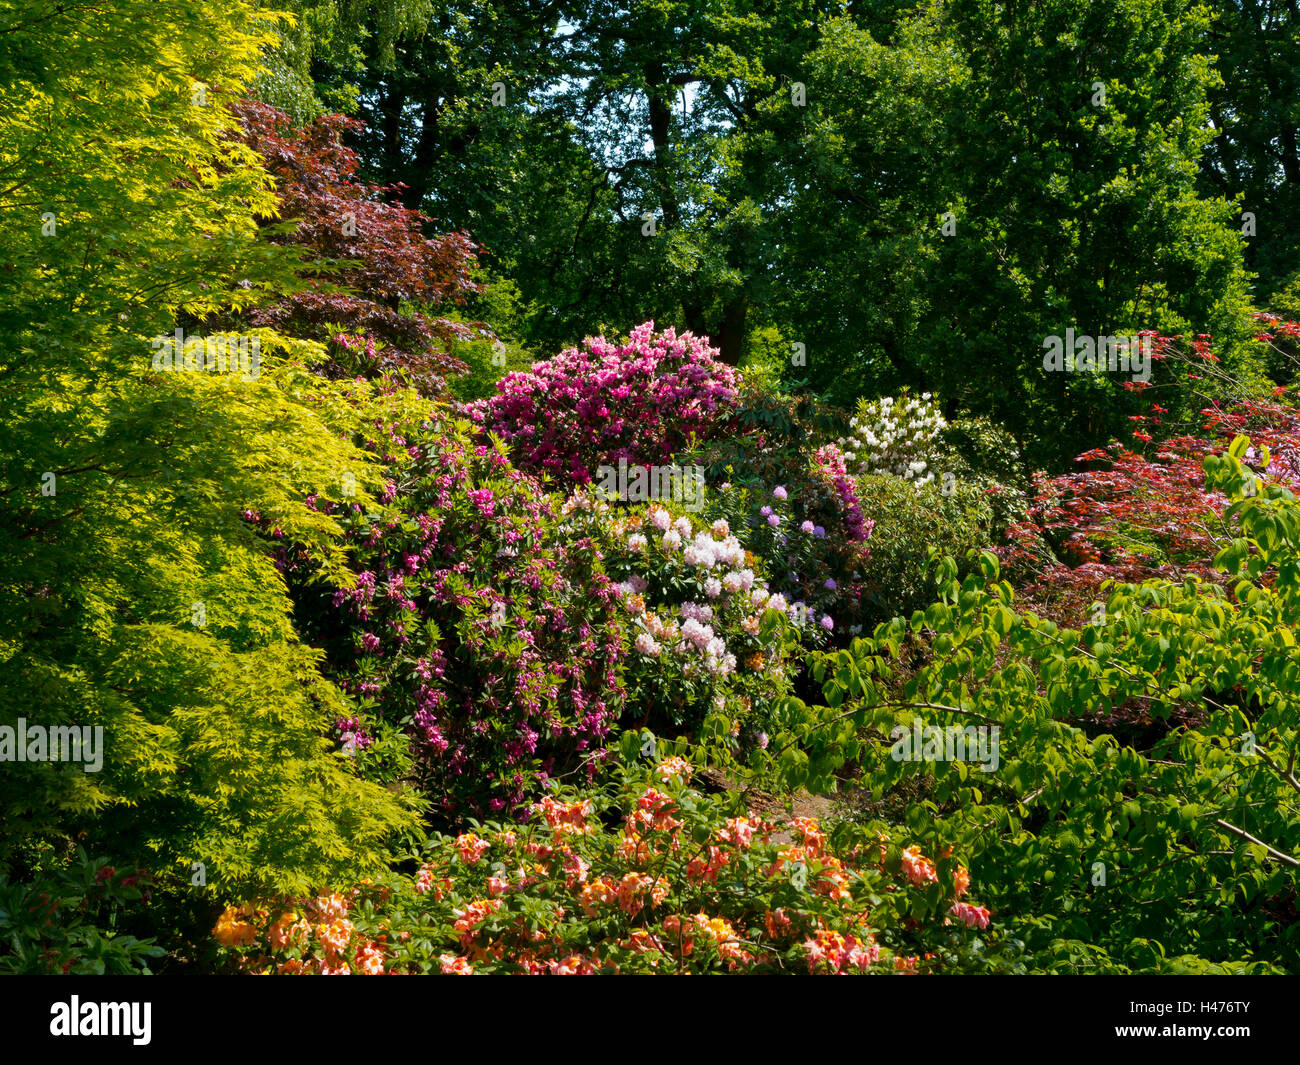 Rhododendrons in the Quarry Garden in early June at the Dorothy Clive Garden near Market Drayton in Shropshire England UK Stock Photo